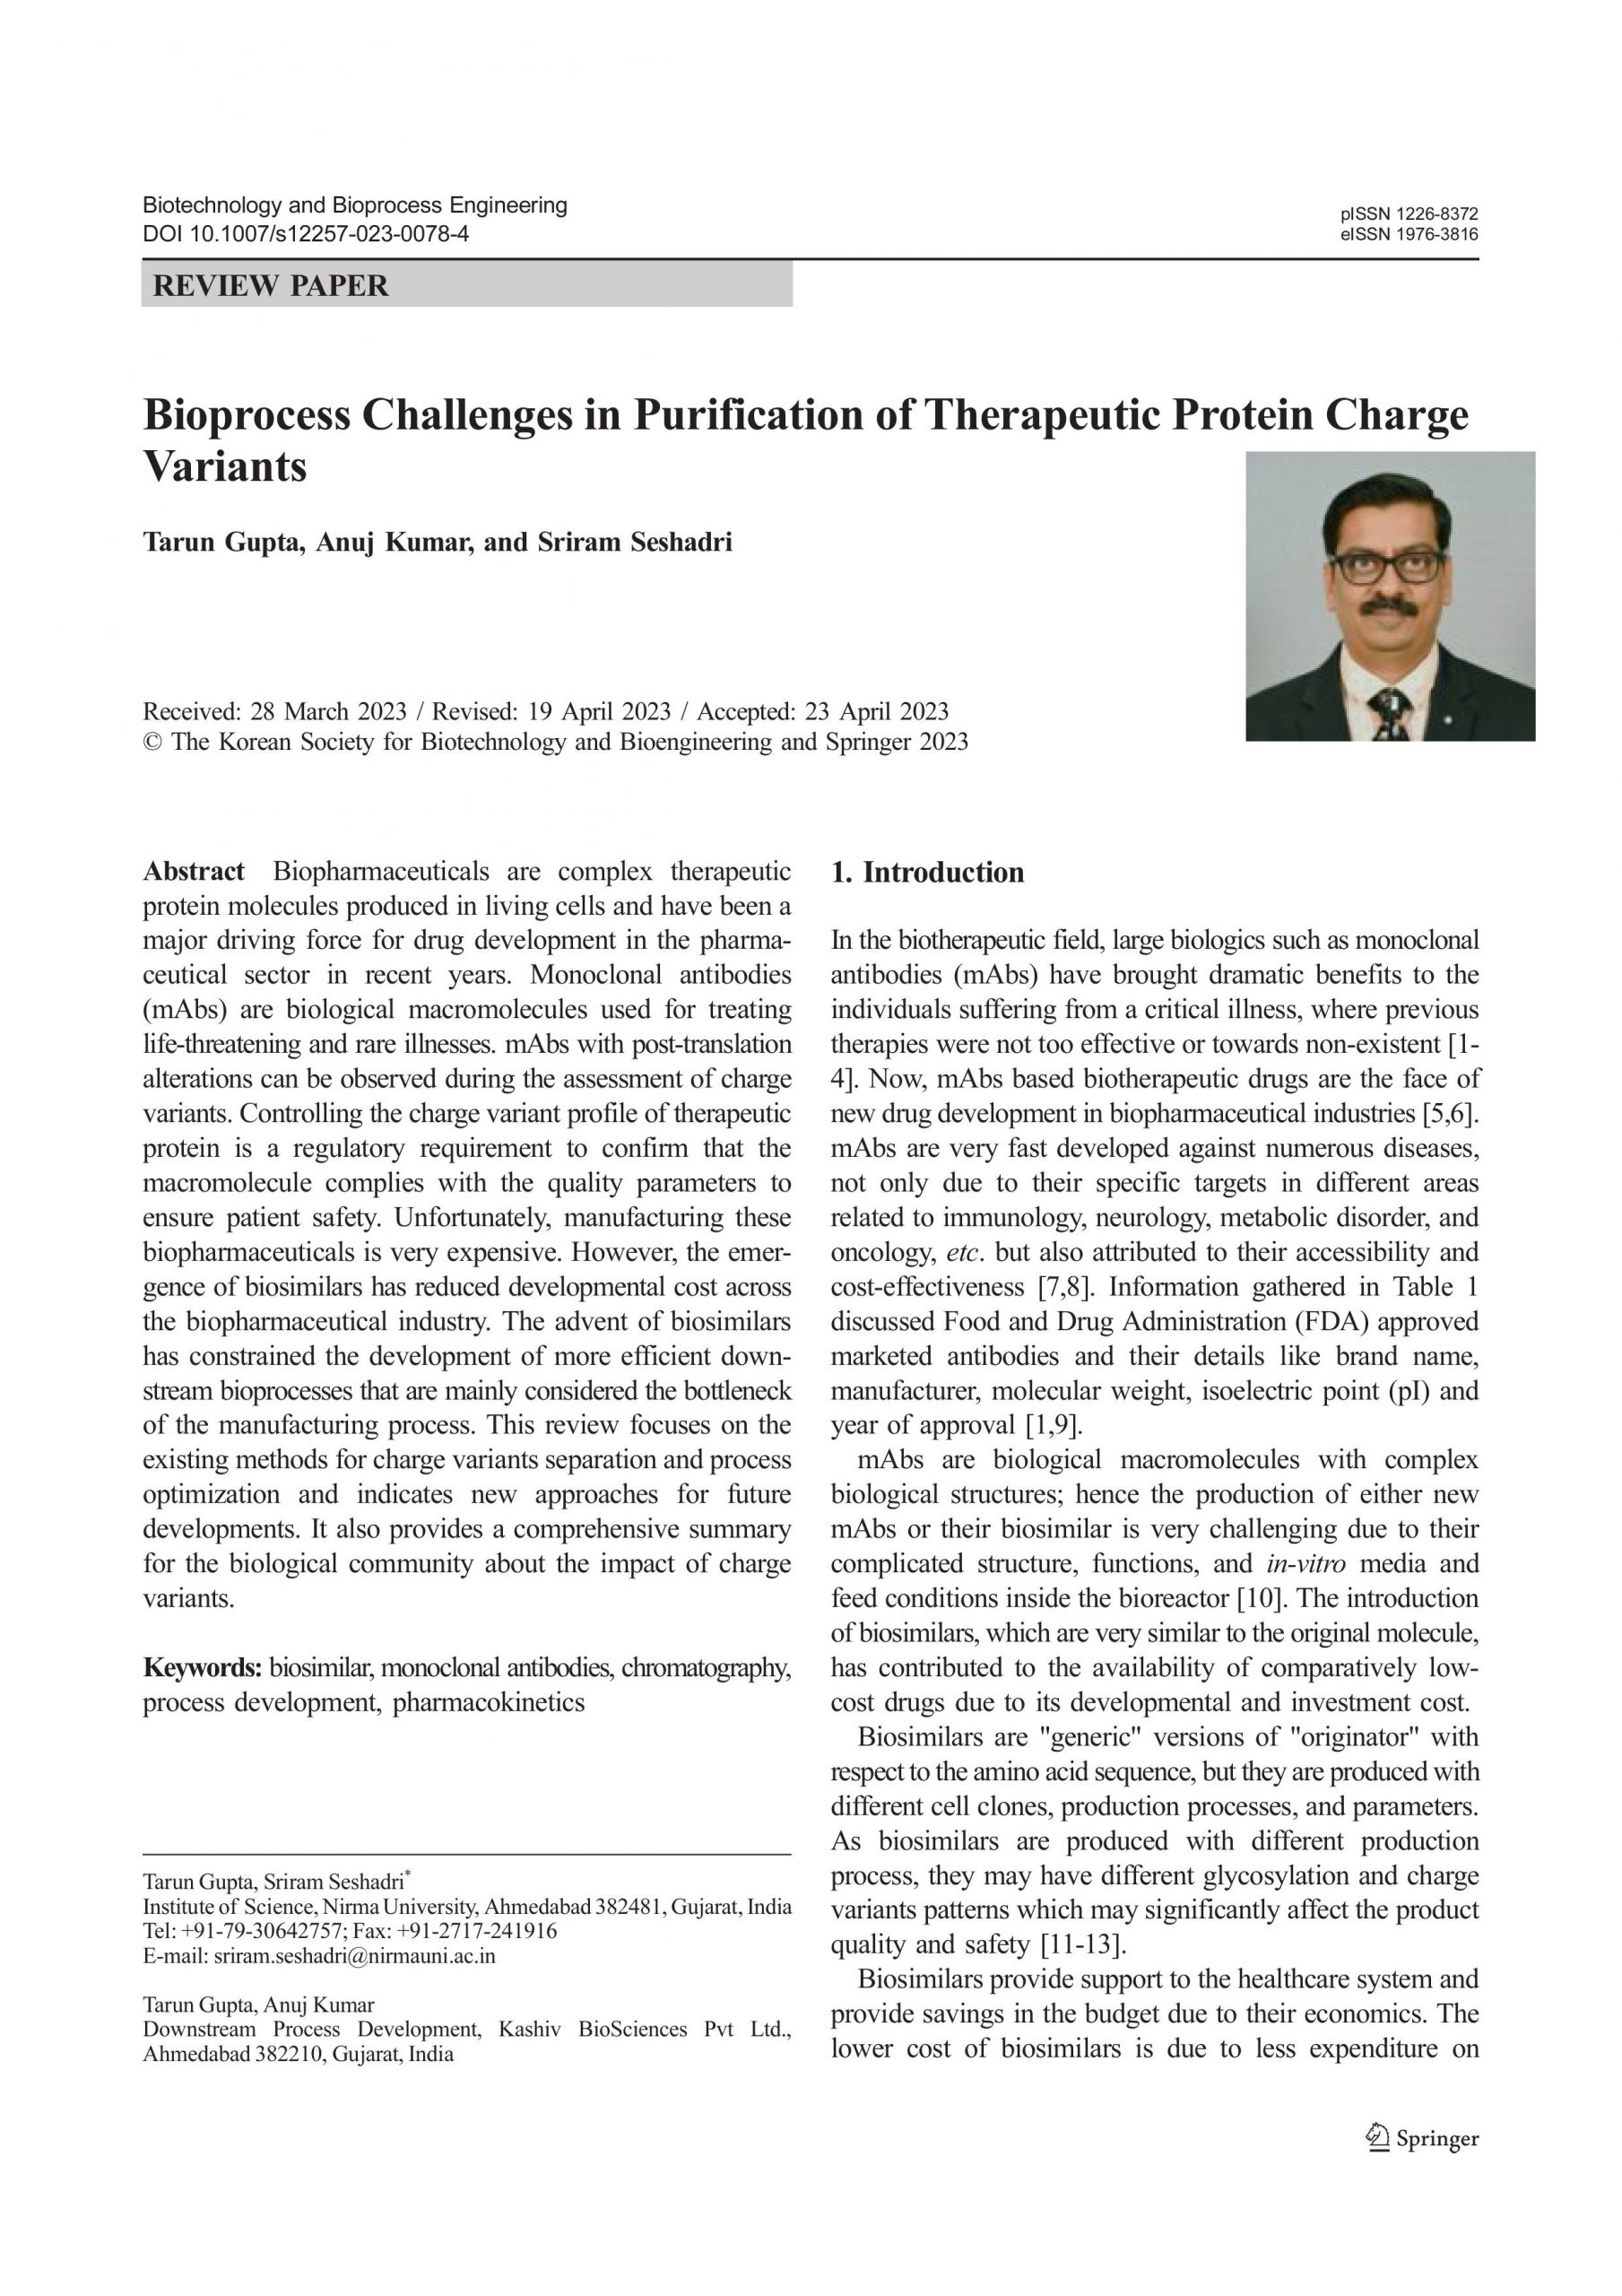 Bioprocess Challenges in Purification of Therapeutic Protein Charge Variants